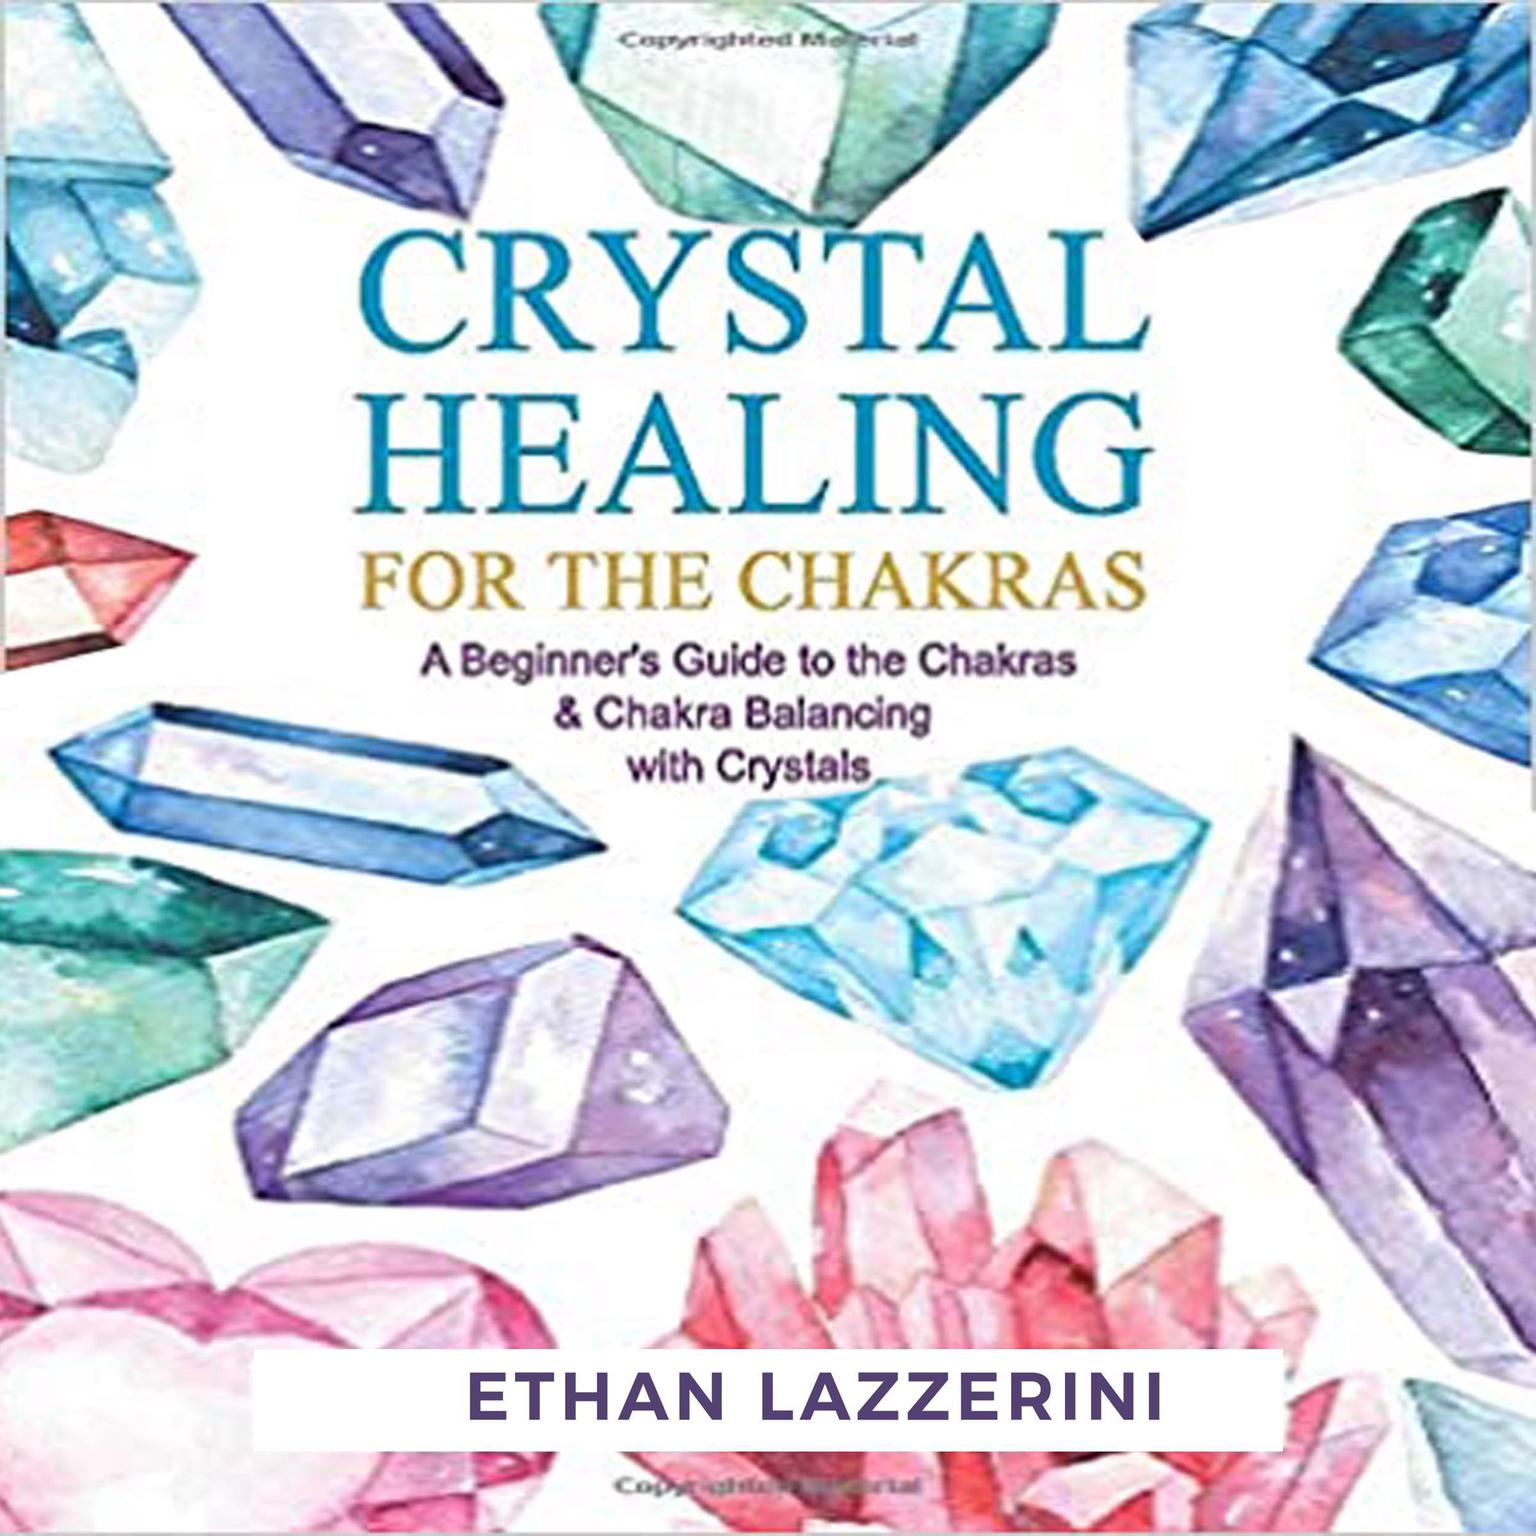 Crystal Healing For The Chakras: A Beginners Guide To The Chakras And Chakra Balancing With Crystals (Abridged) Audiobook, by Ethan Lazzerini